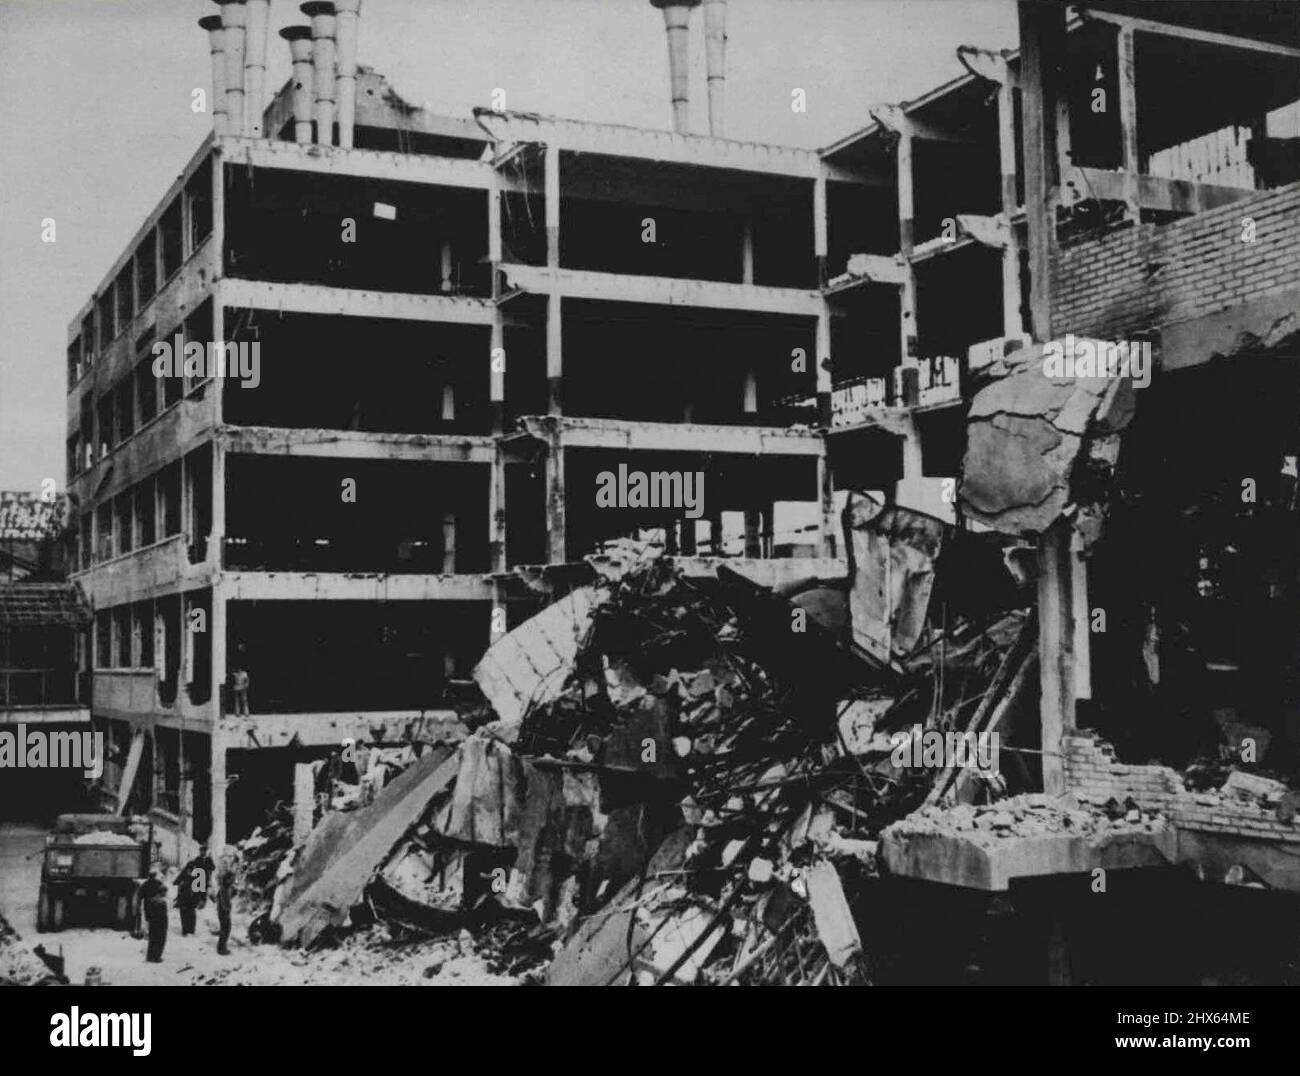 Demolition work on the bombed upholstery, coach work and spraying section of the Ile Seguin. These ground pictures of the Renault Works at Billancourt, were procured recently after the liberation of Paris, and show conclusively the results of the R.A.F. Bomber Command attack of March 3rd, 1942. October 21, 1944. (Photo by Department of Air). Stock Photo